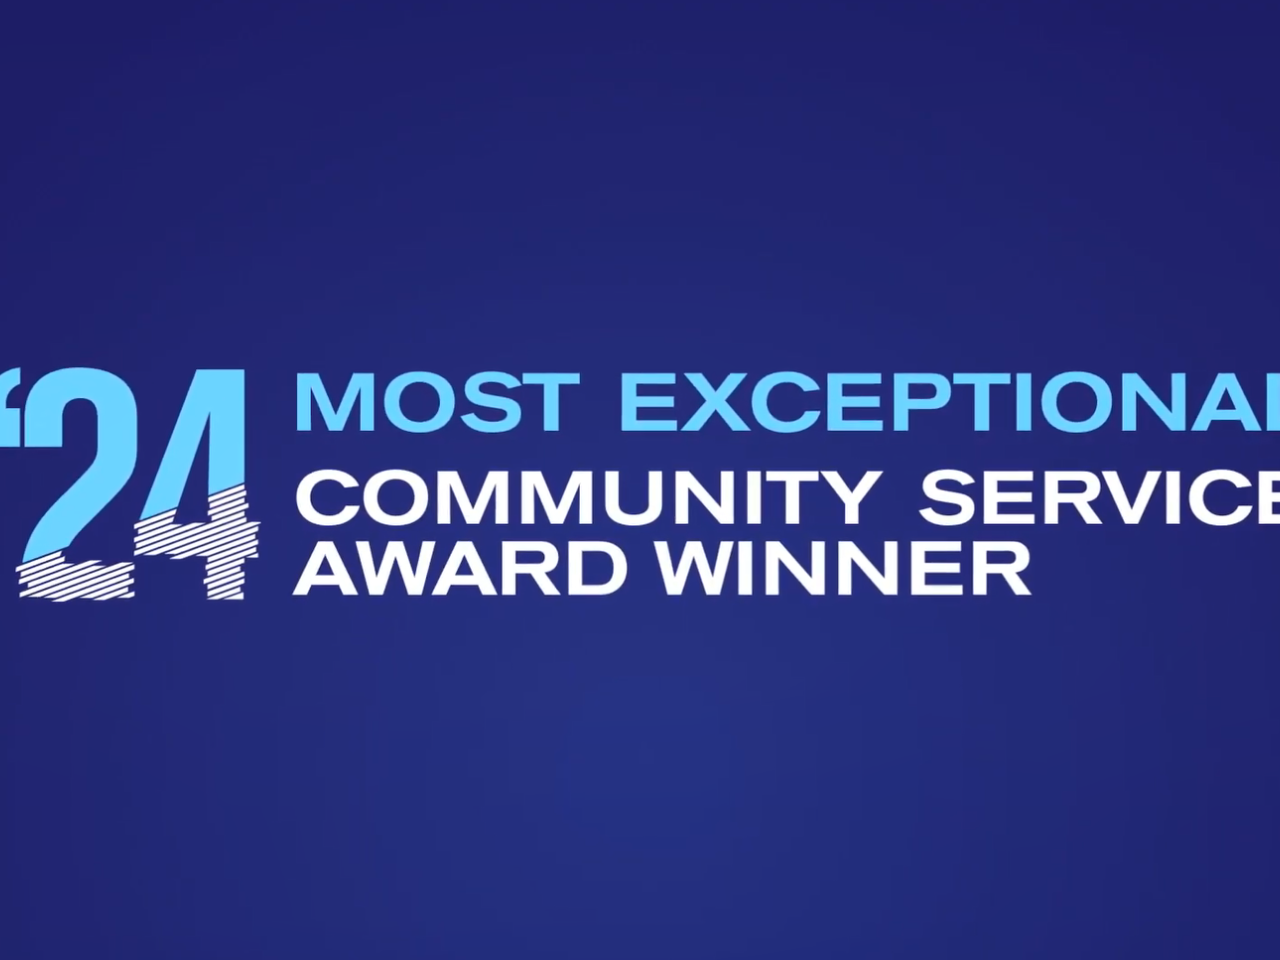 "'24 Most Exceptional Community Service Award Winner."